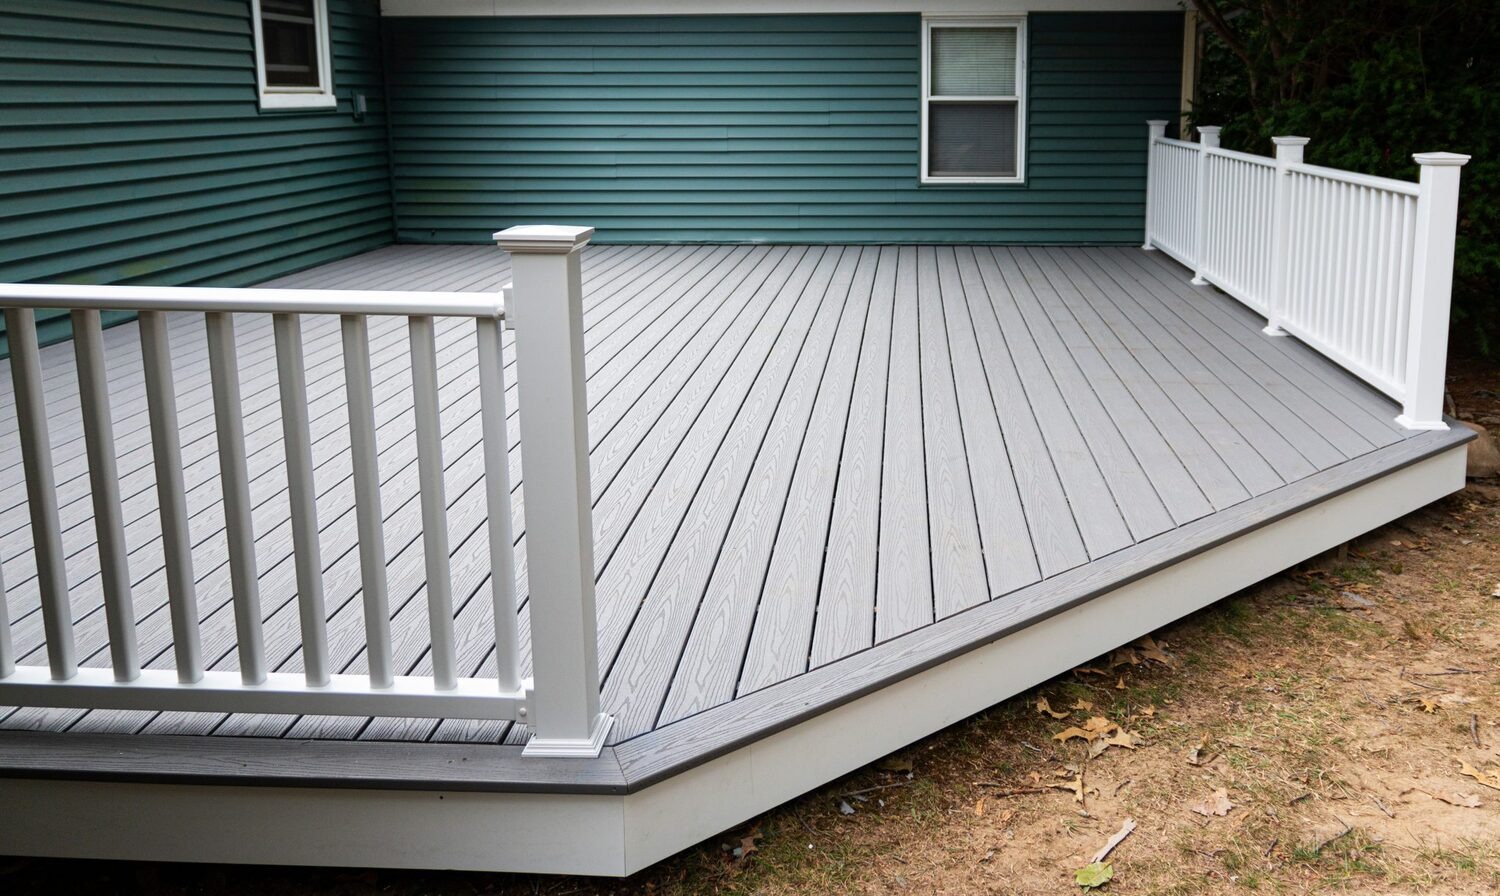 Expert porch builders Wilmette based crafted a beautiful wooden deck in the backyard